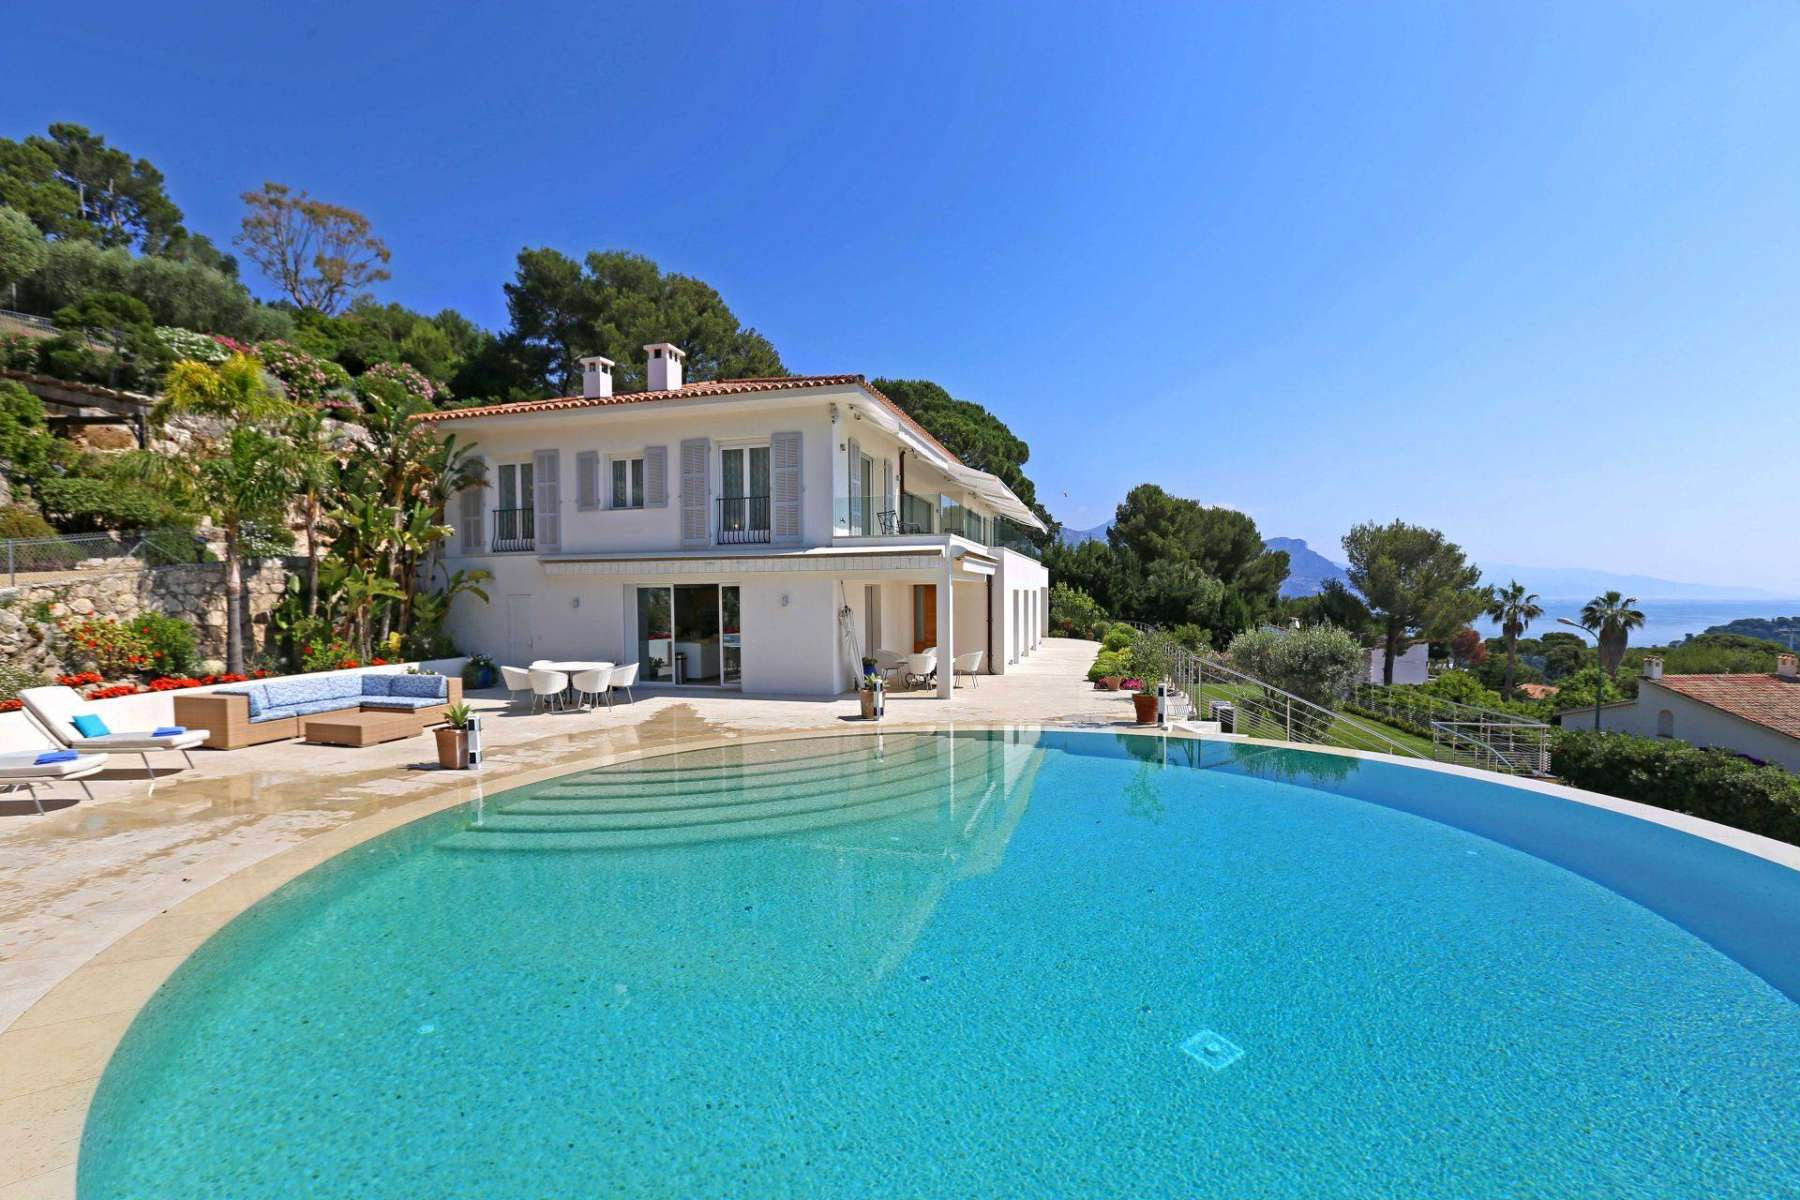 Cap Ferrat Sea View Villa with Modern Design and Expansive Grounds